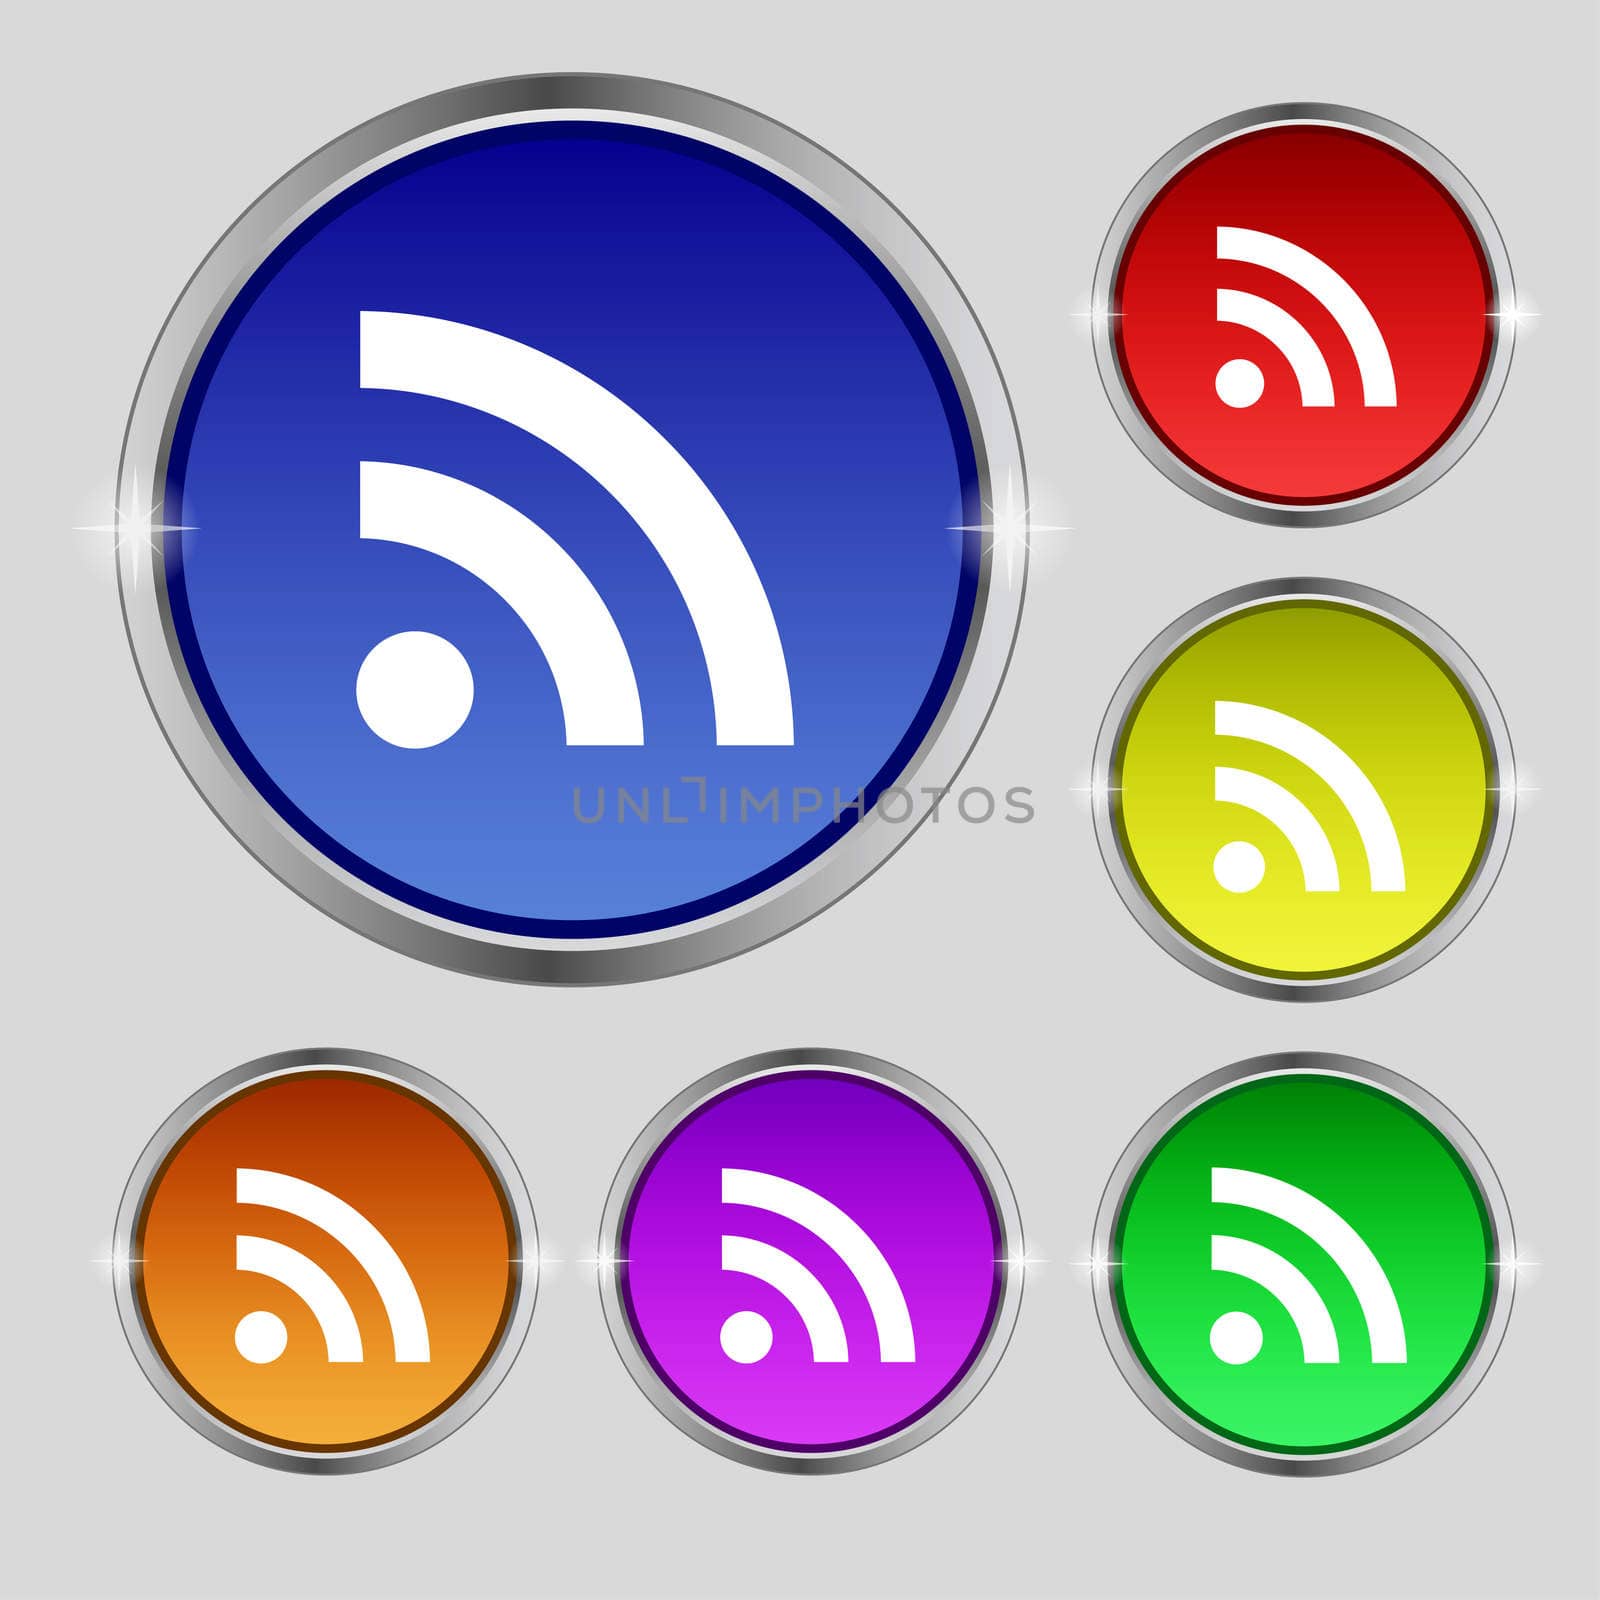 RSS feed icon sign. Round symbol on bright colourful buttons. illustration